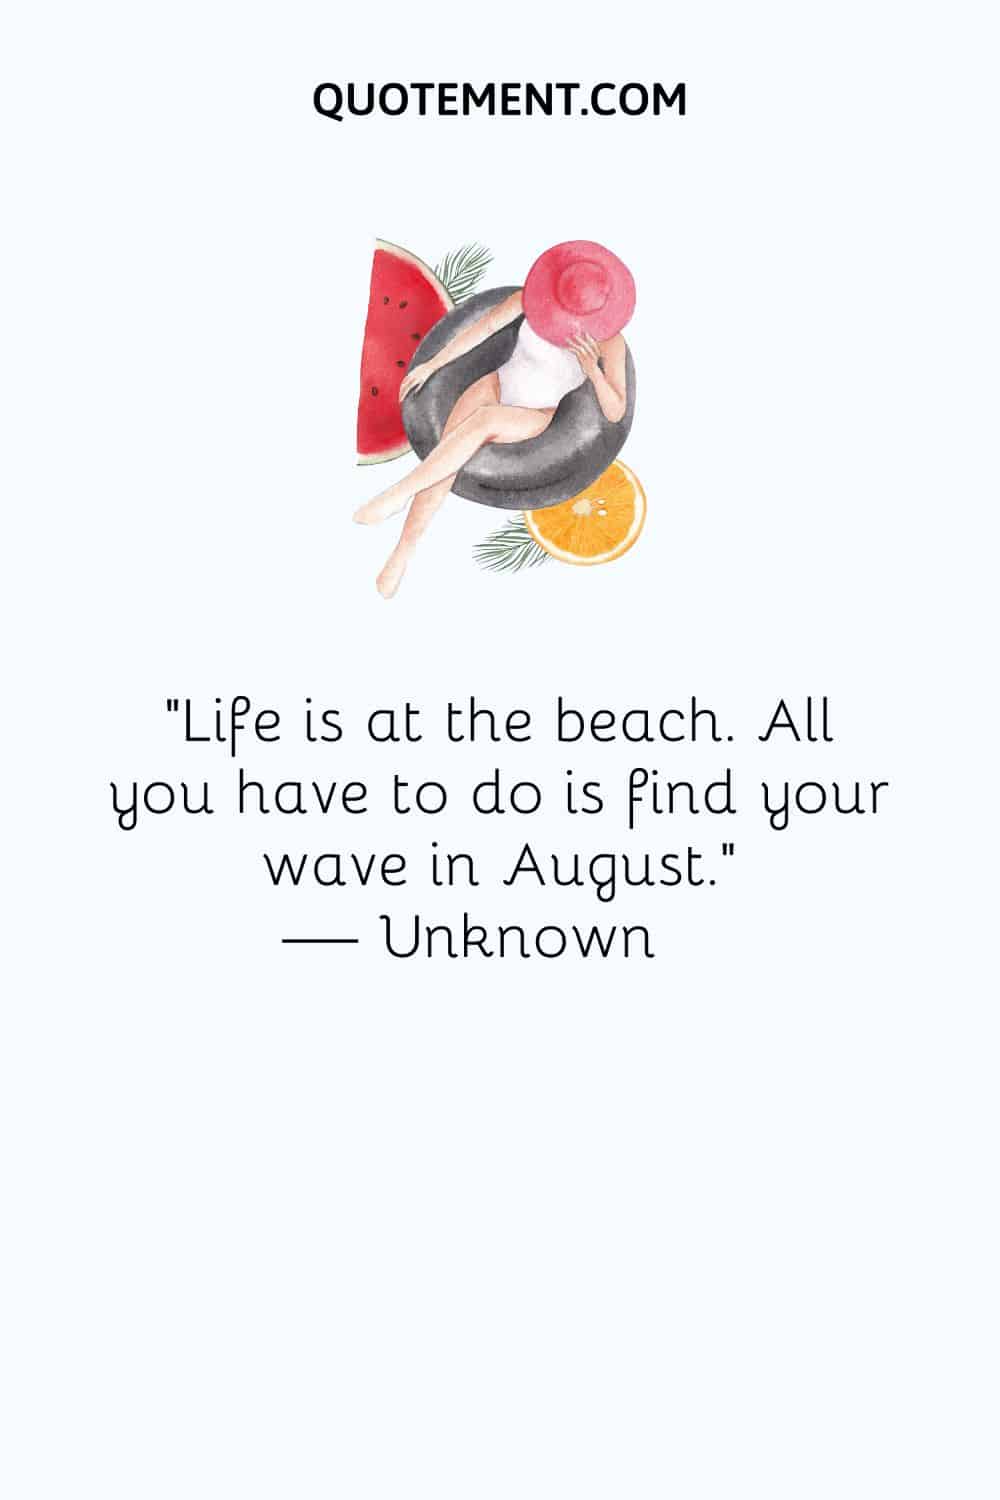 Life is at the beach. All you have to do is find your wave in August